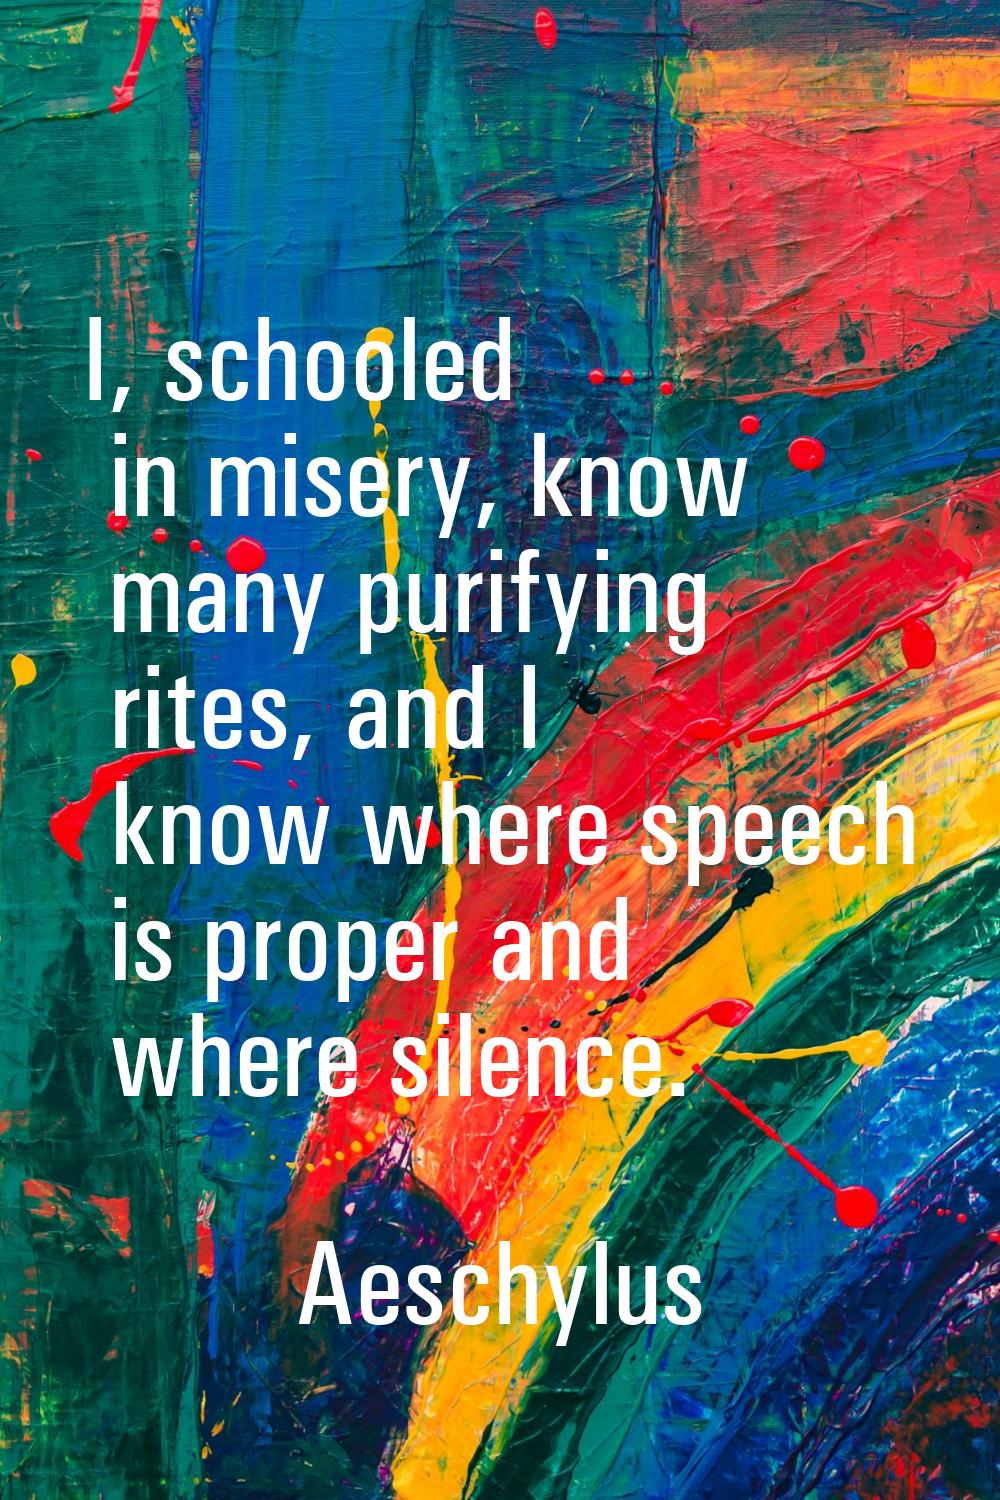 I, schooled in misery, know many purifying rites, and I know where speech is proper and where silen